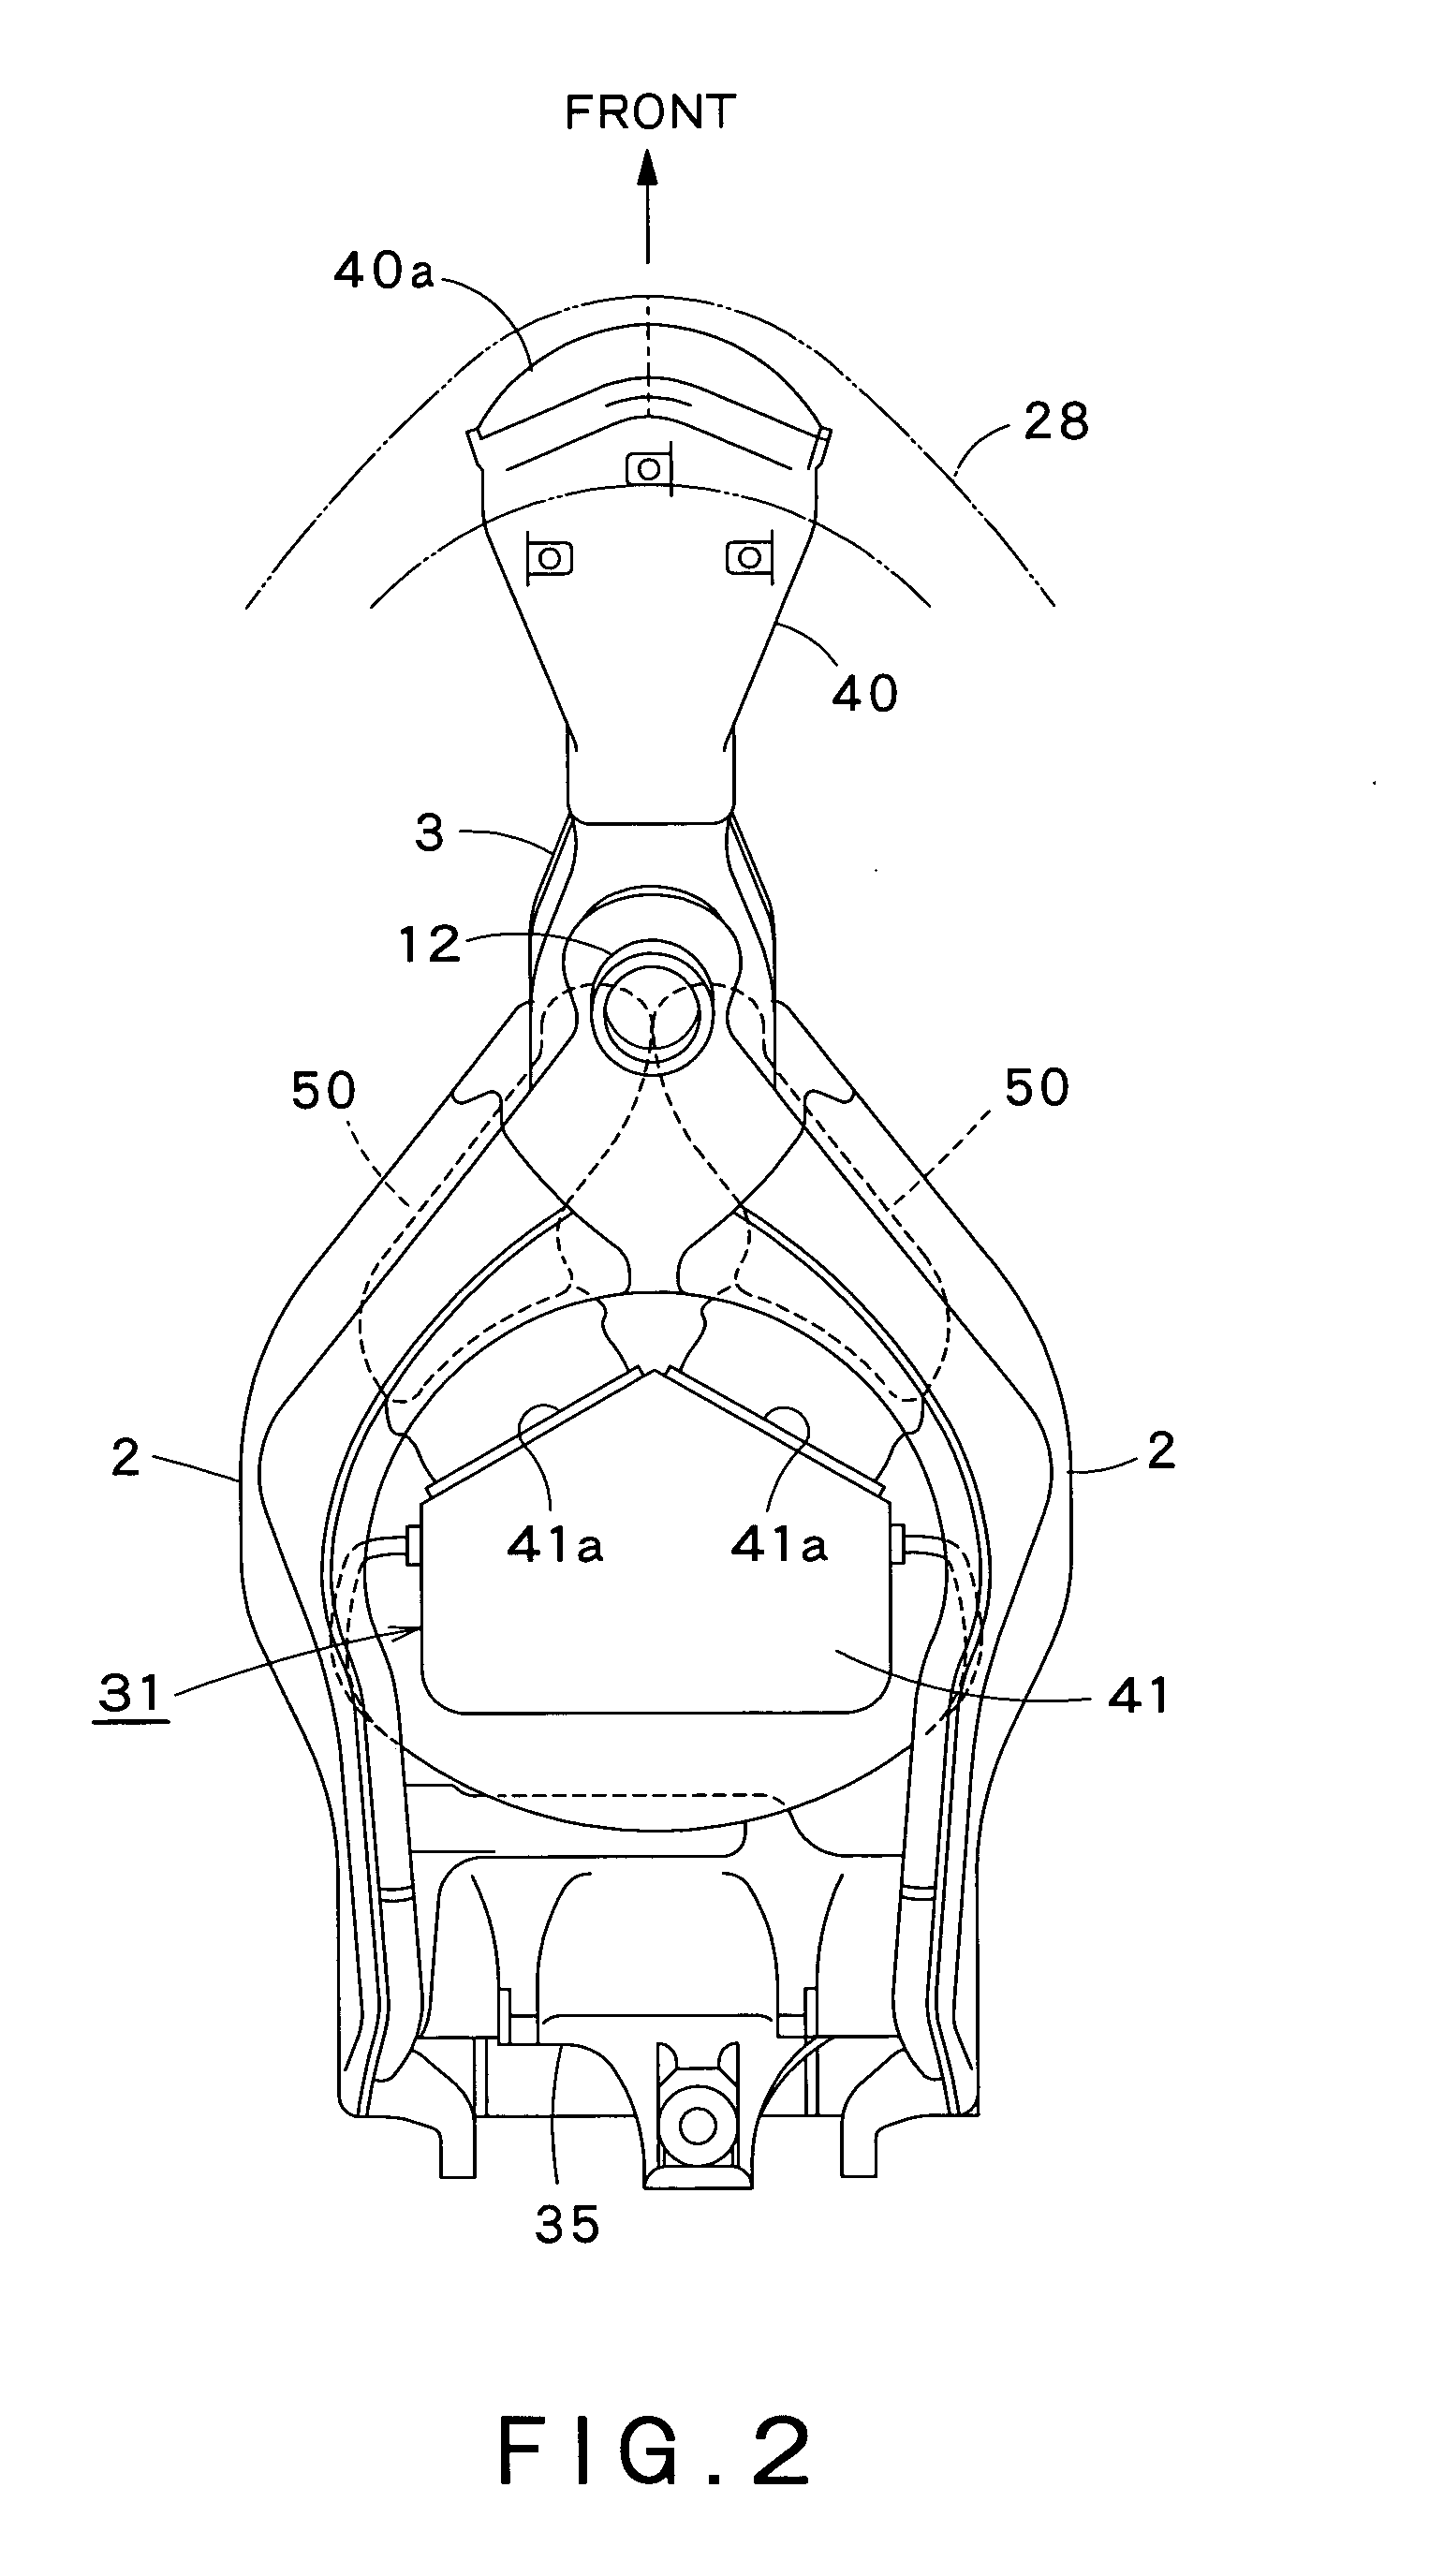 Air intake structure for motorcycle